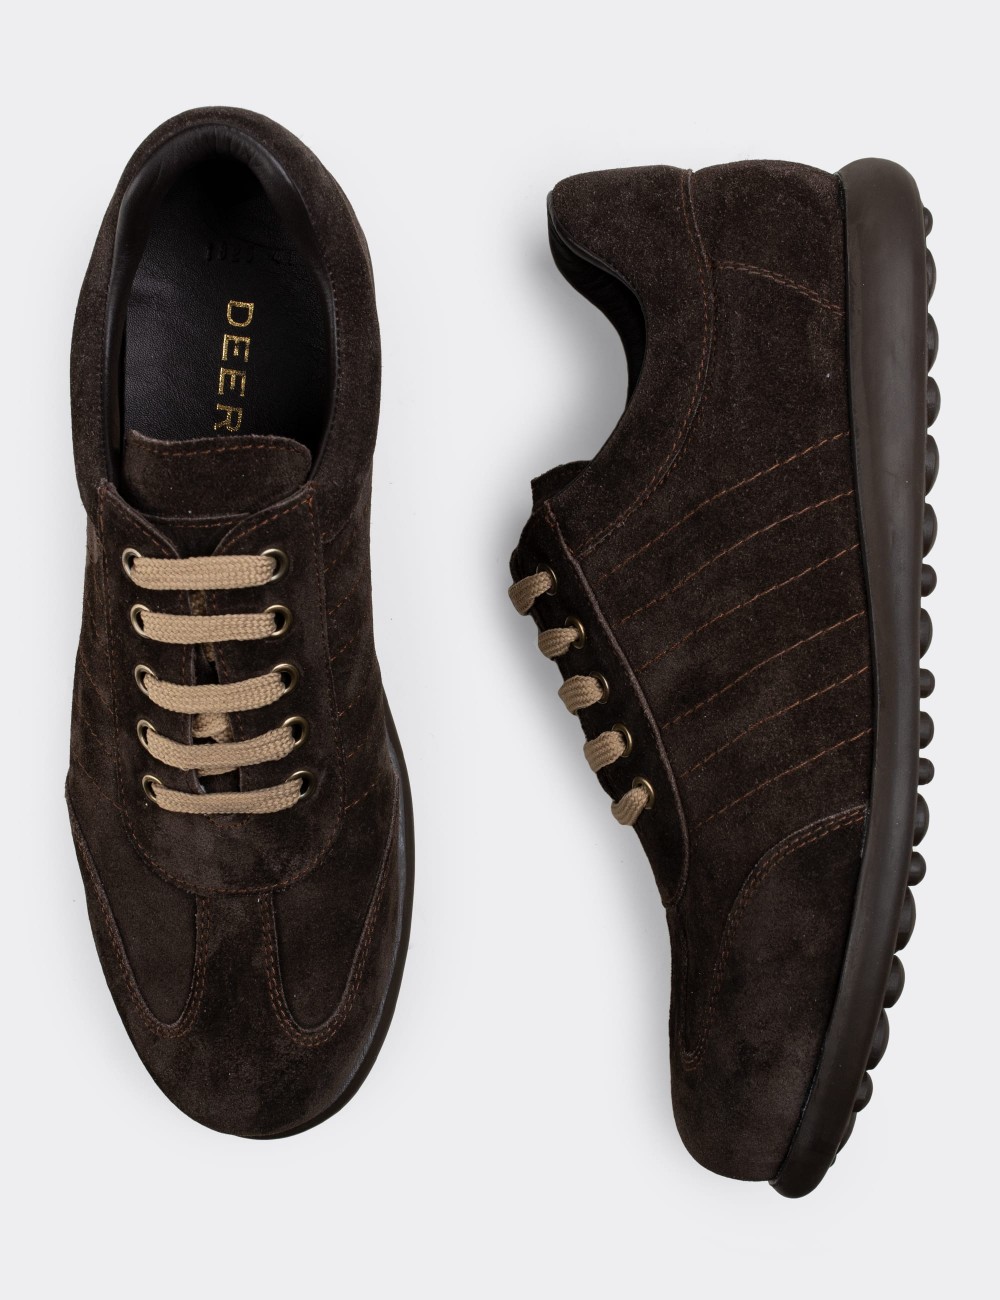 Brown Suede Leather Lace-up Shoes - 01826MKHVC06